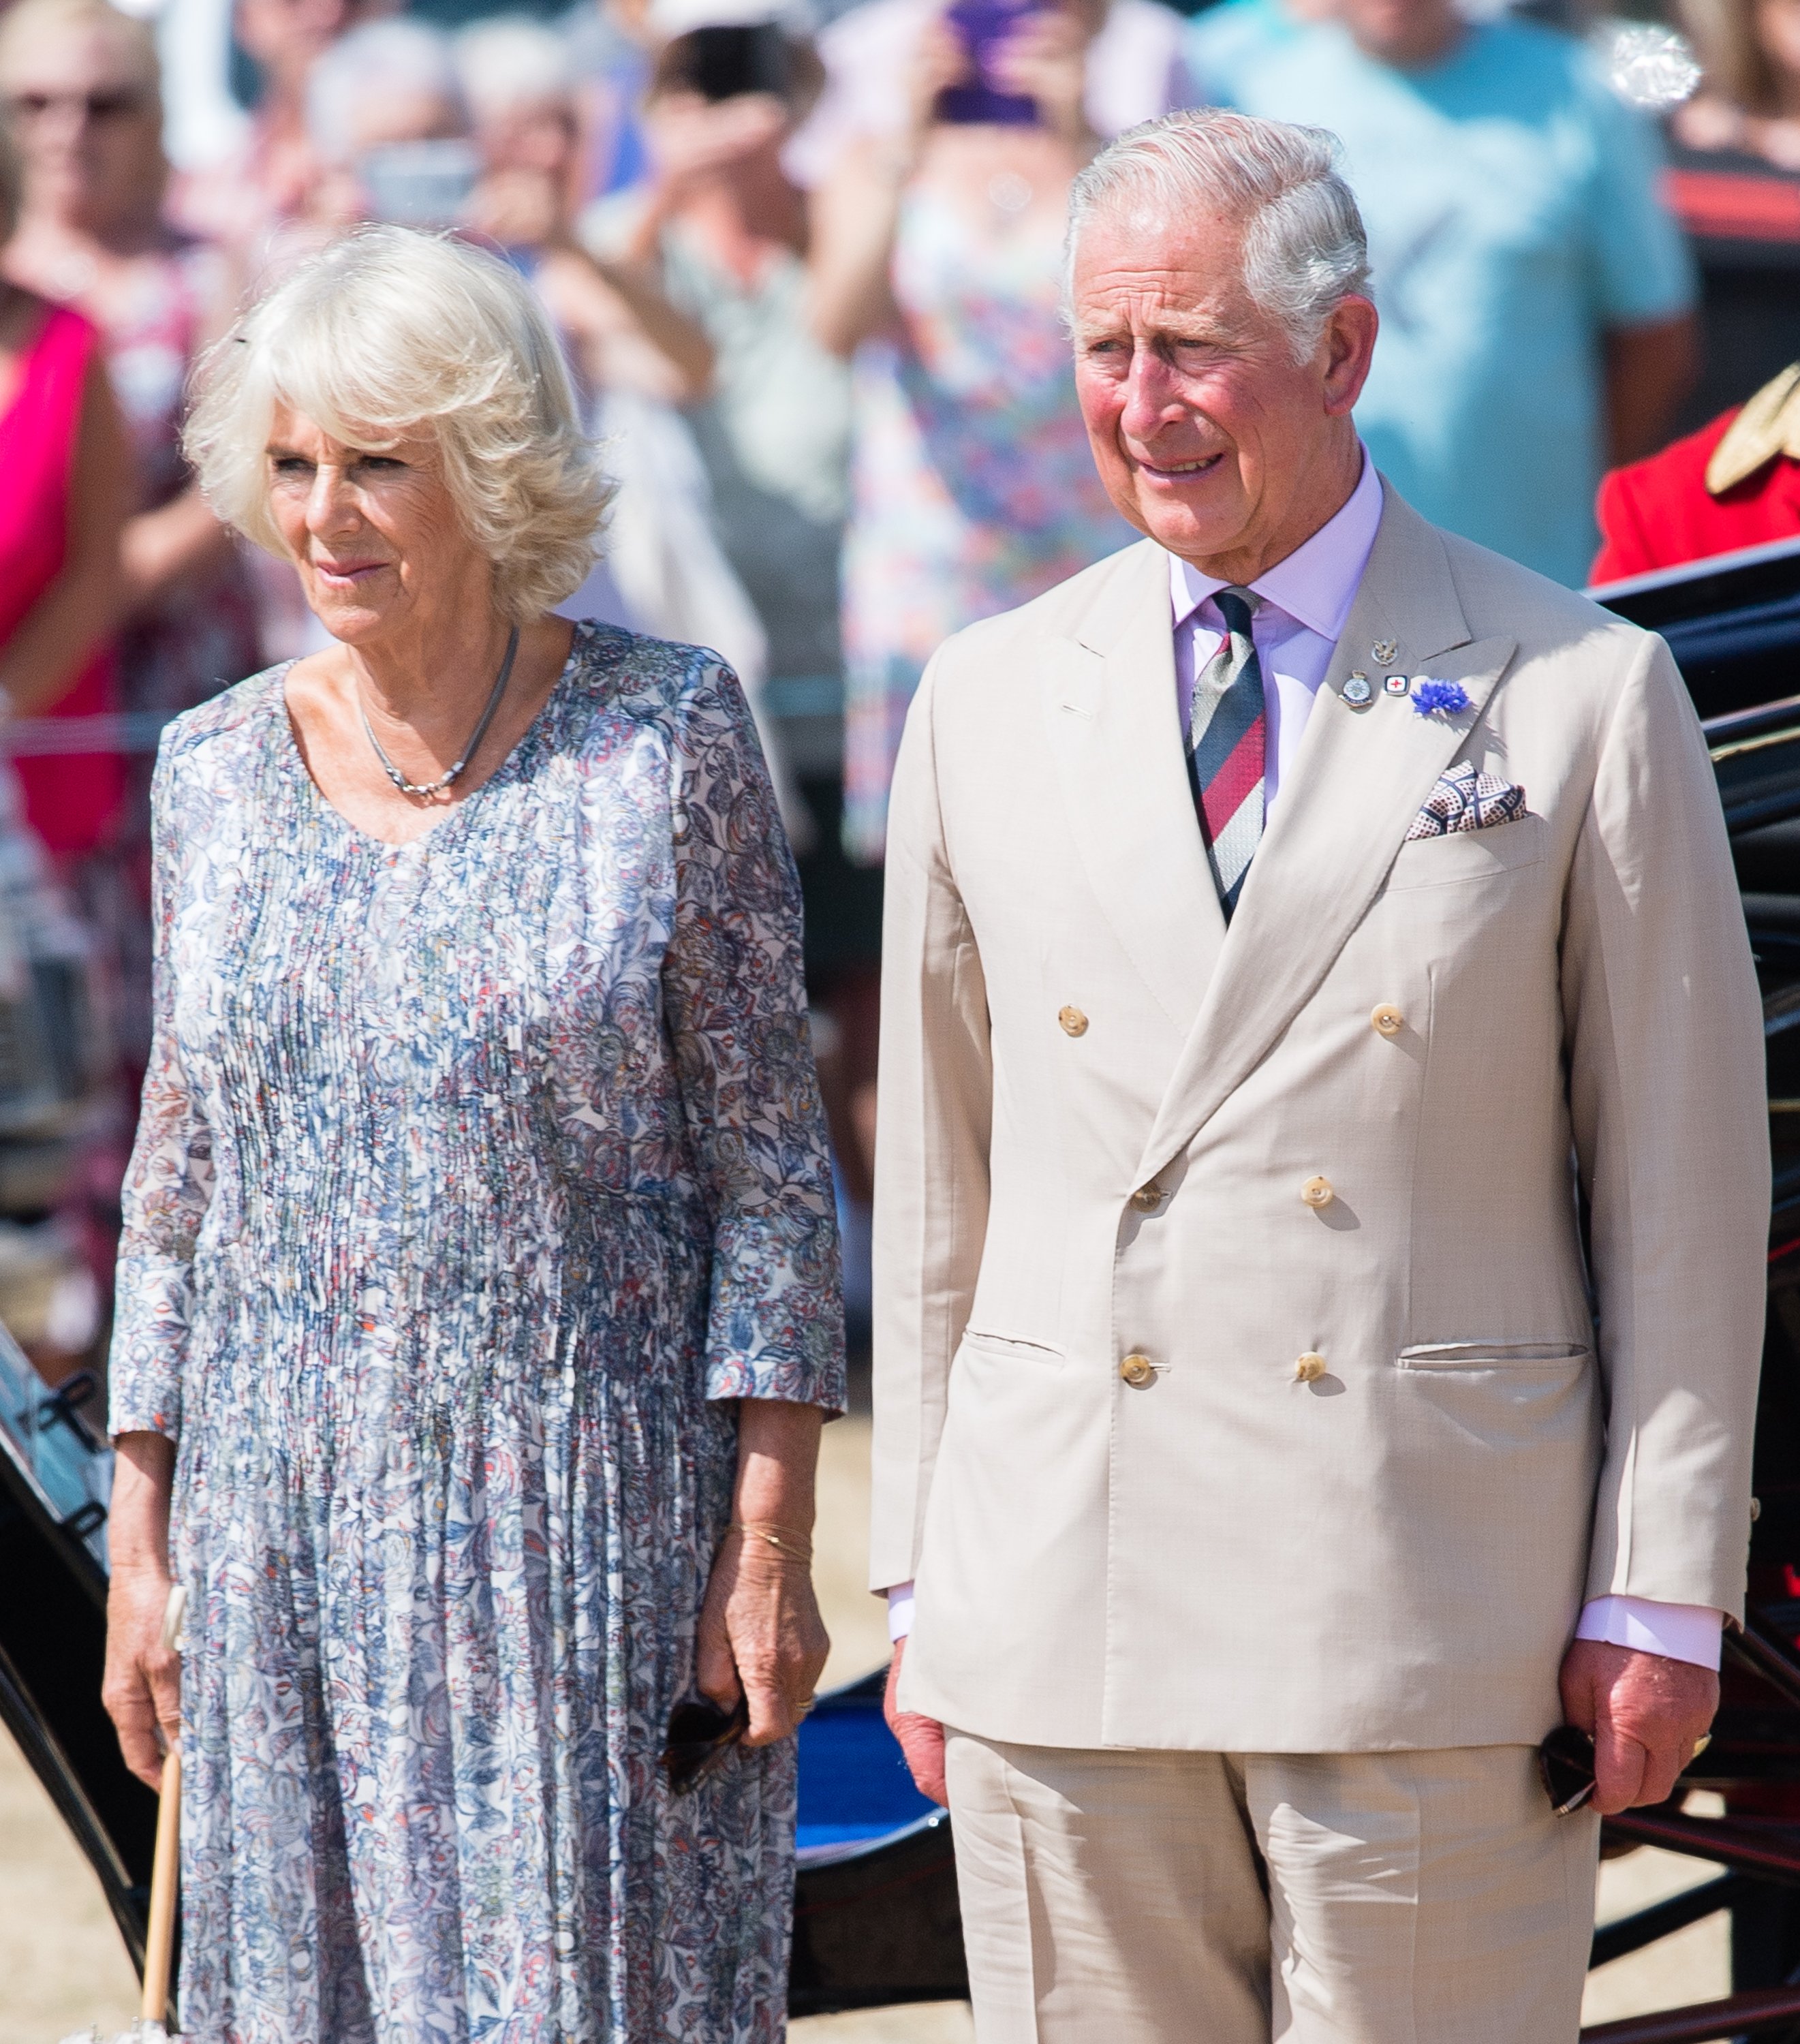 Prince Charles and Camilla visit Sandringham Flower Show 2018 at Sandringham House on July 25, 2018, in King's Lynn, England. | Source: Getty Images